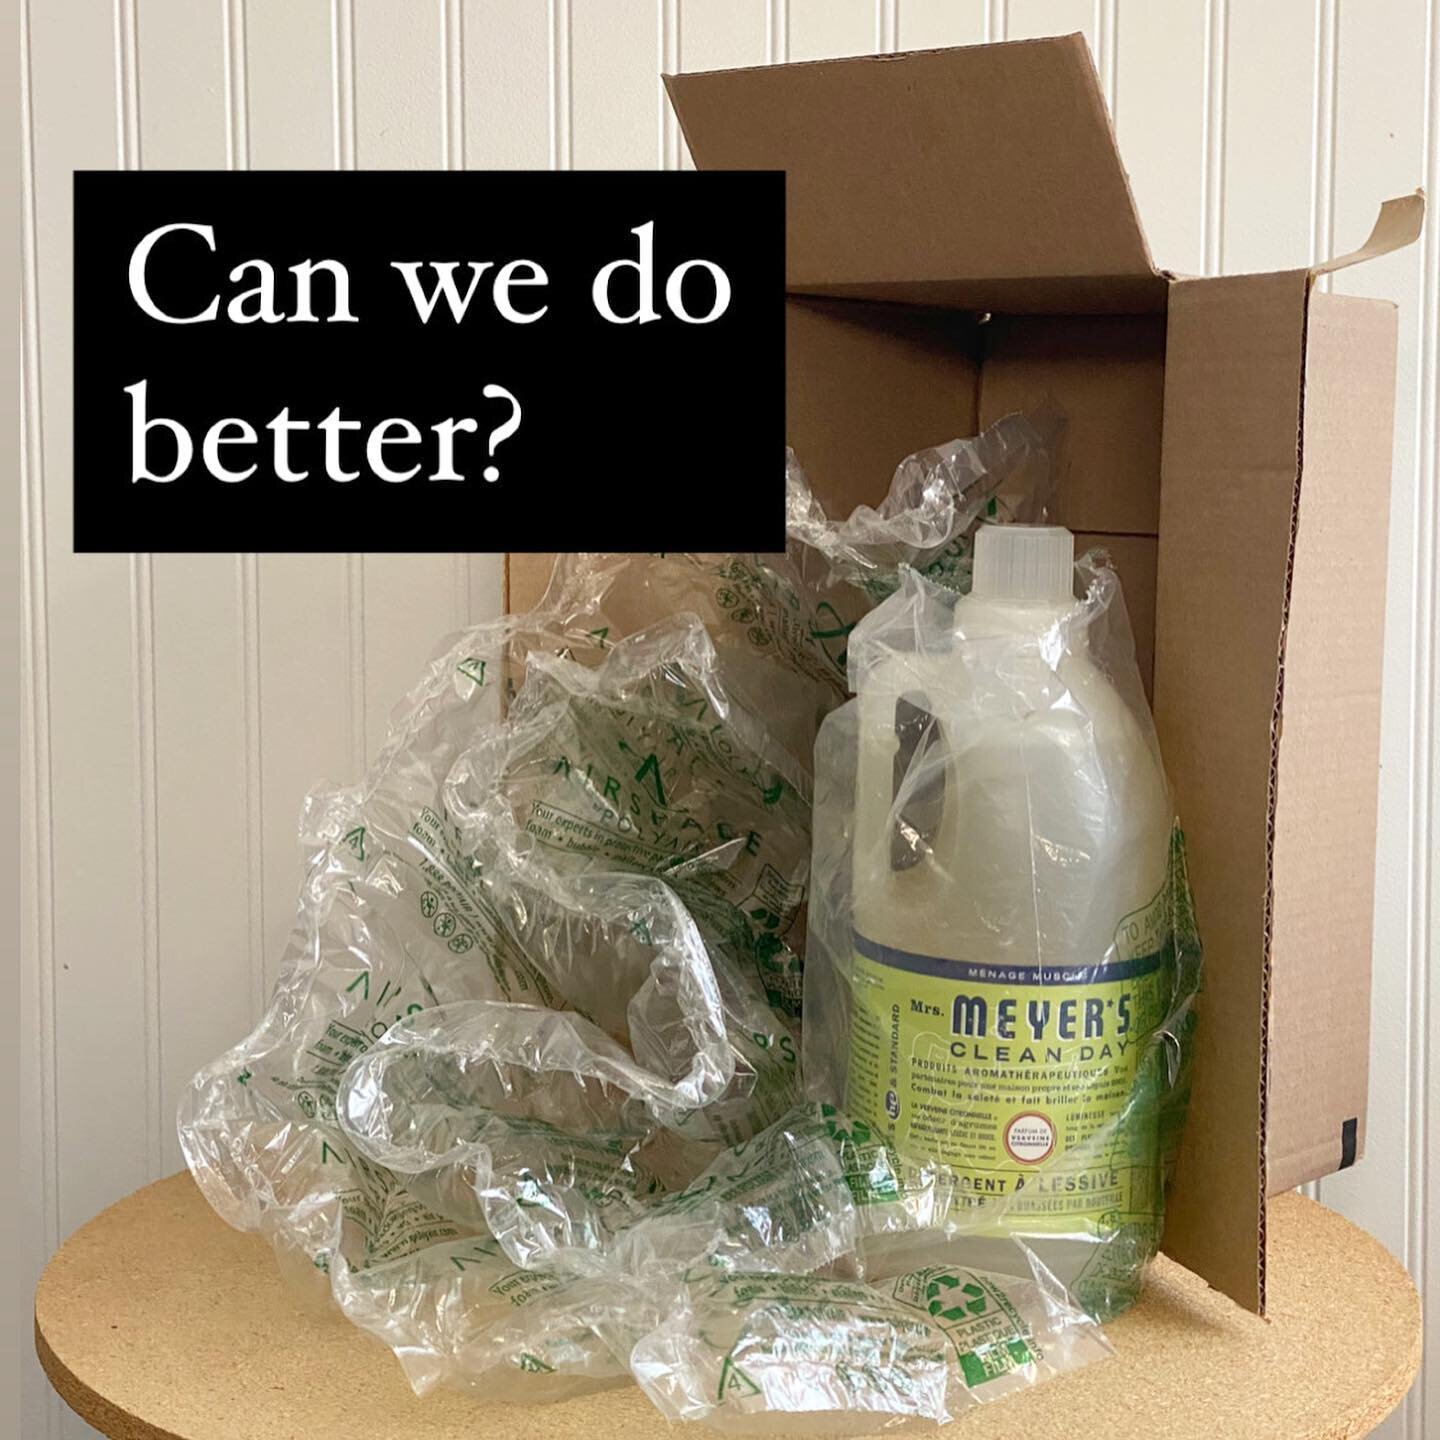 This is how much waste I generated by ordering one cleaning product online. 

In our one-click convenience society, it&rsquo;s tough to sustain ecological habits. 

Props to @nelliesclean for making reusable packaging AND zero-waste refills available